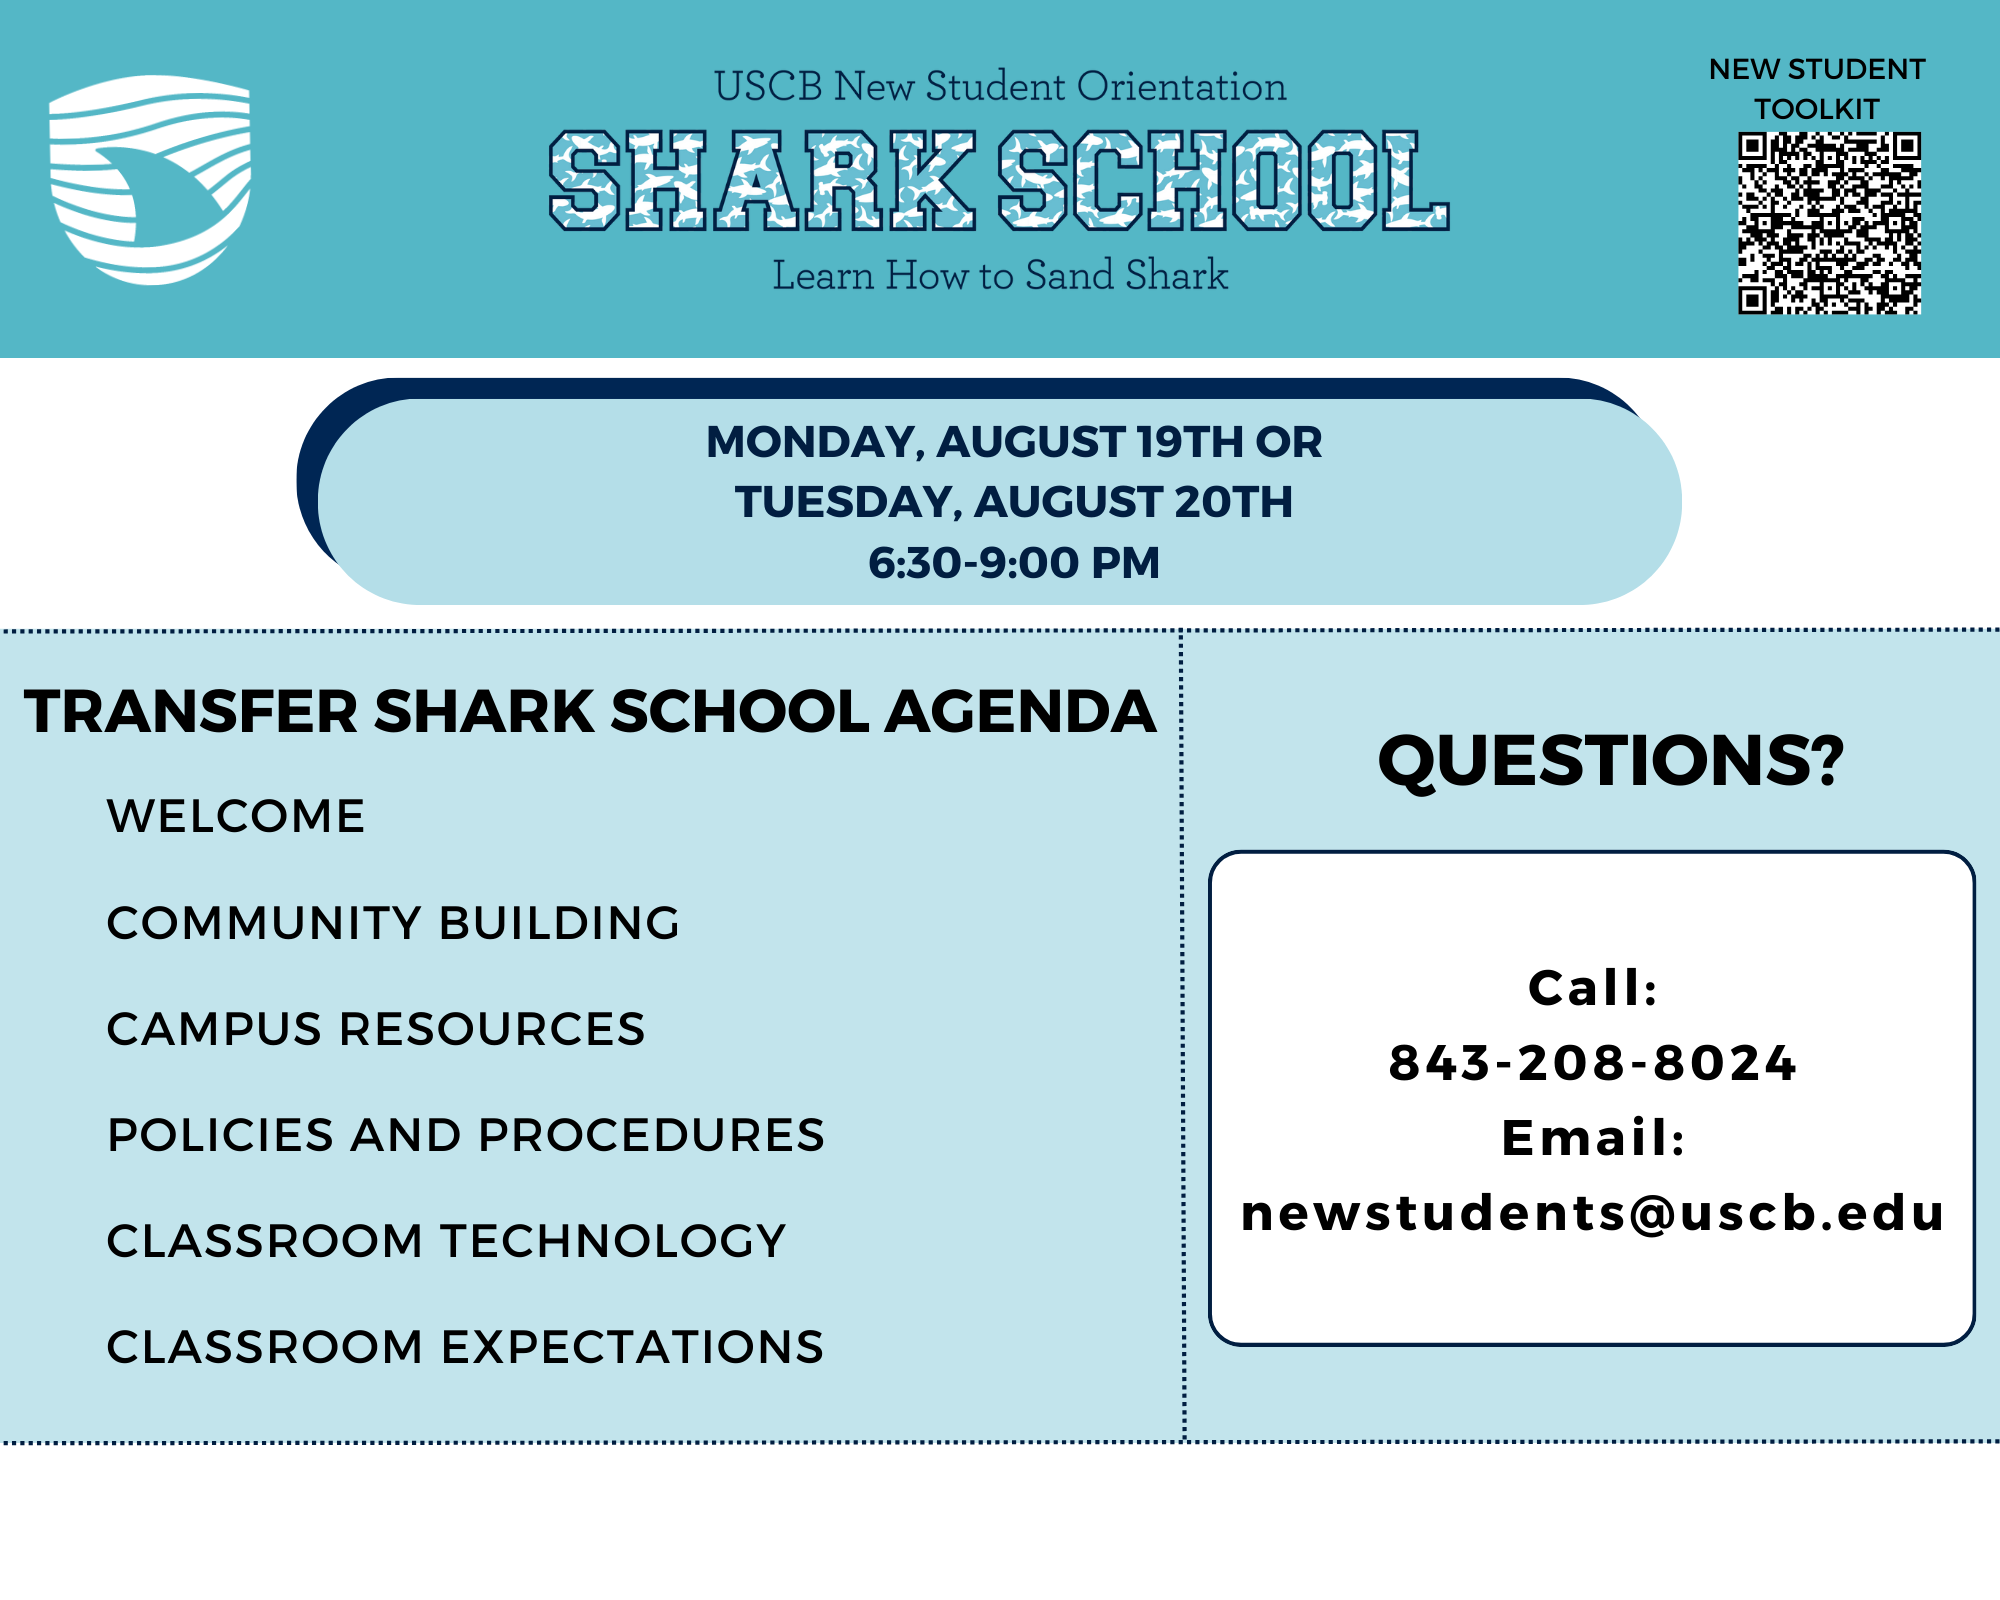 MONDAY, AUGUST 19TH OR TUESDAY, AUGUST 20TH, 6:30-9:00 PM Transfer Shark School Agenda WELCOME  COMMUNITY BUILDING CAMPUS RESOURCES POLICIES AND PROCEDURES CLASSROOM TECHNOLOGY CLASSROOM EXPECTATIONS Questions?  Call: 843-208-8024  Email: newstudents@uscb.edu